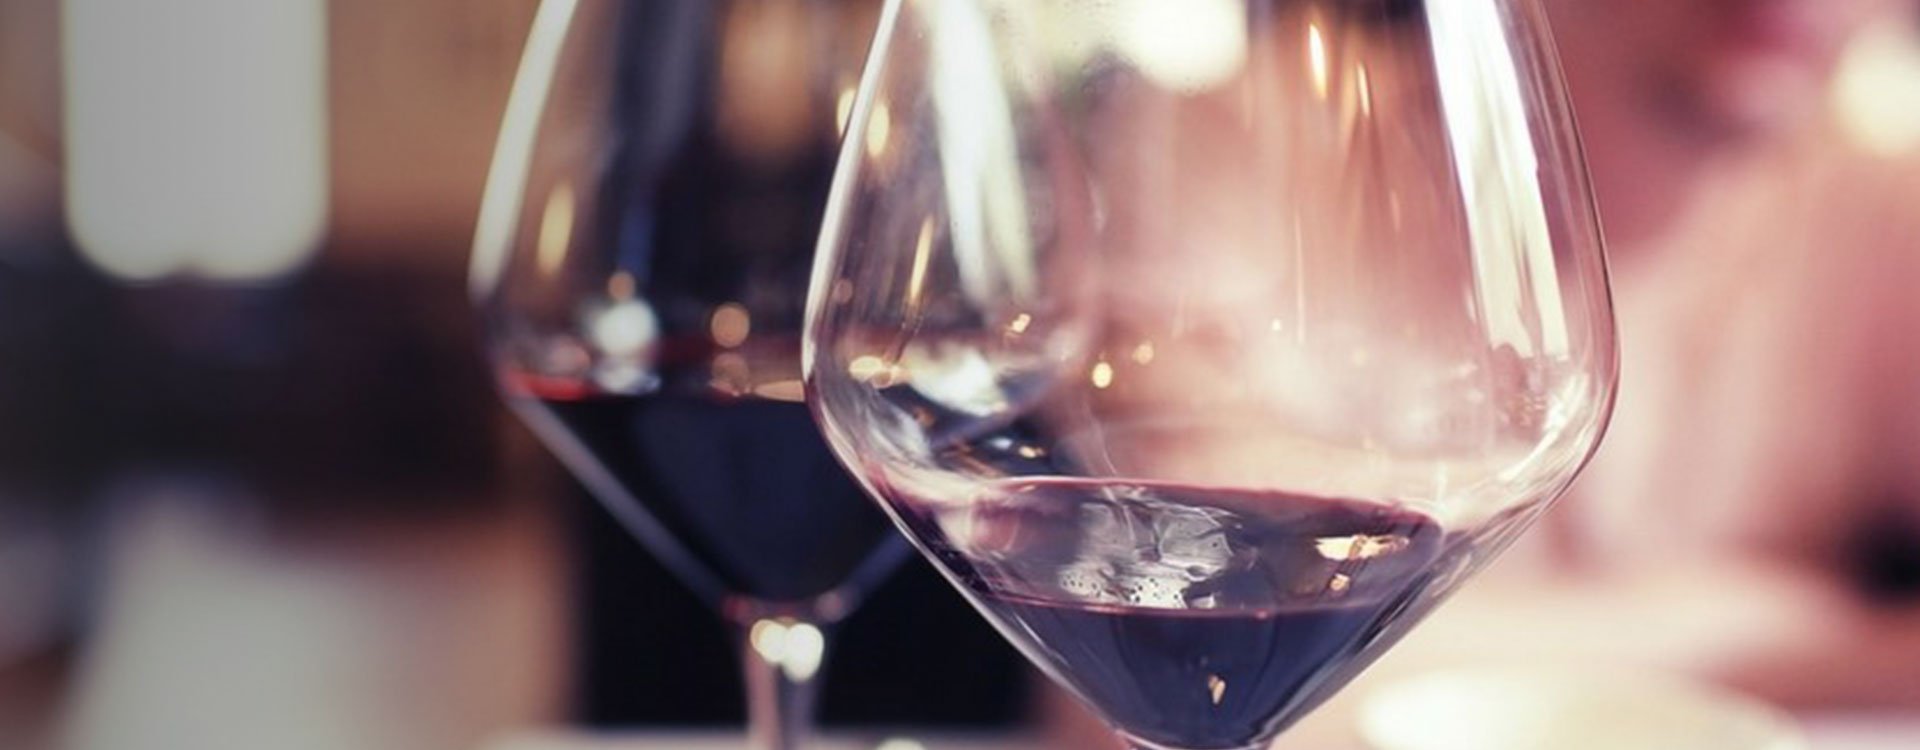 Fall in Love with the New World’s Finest Pinot Noirs